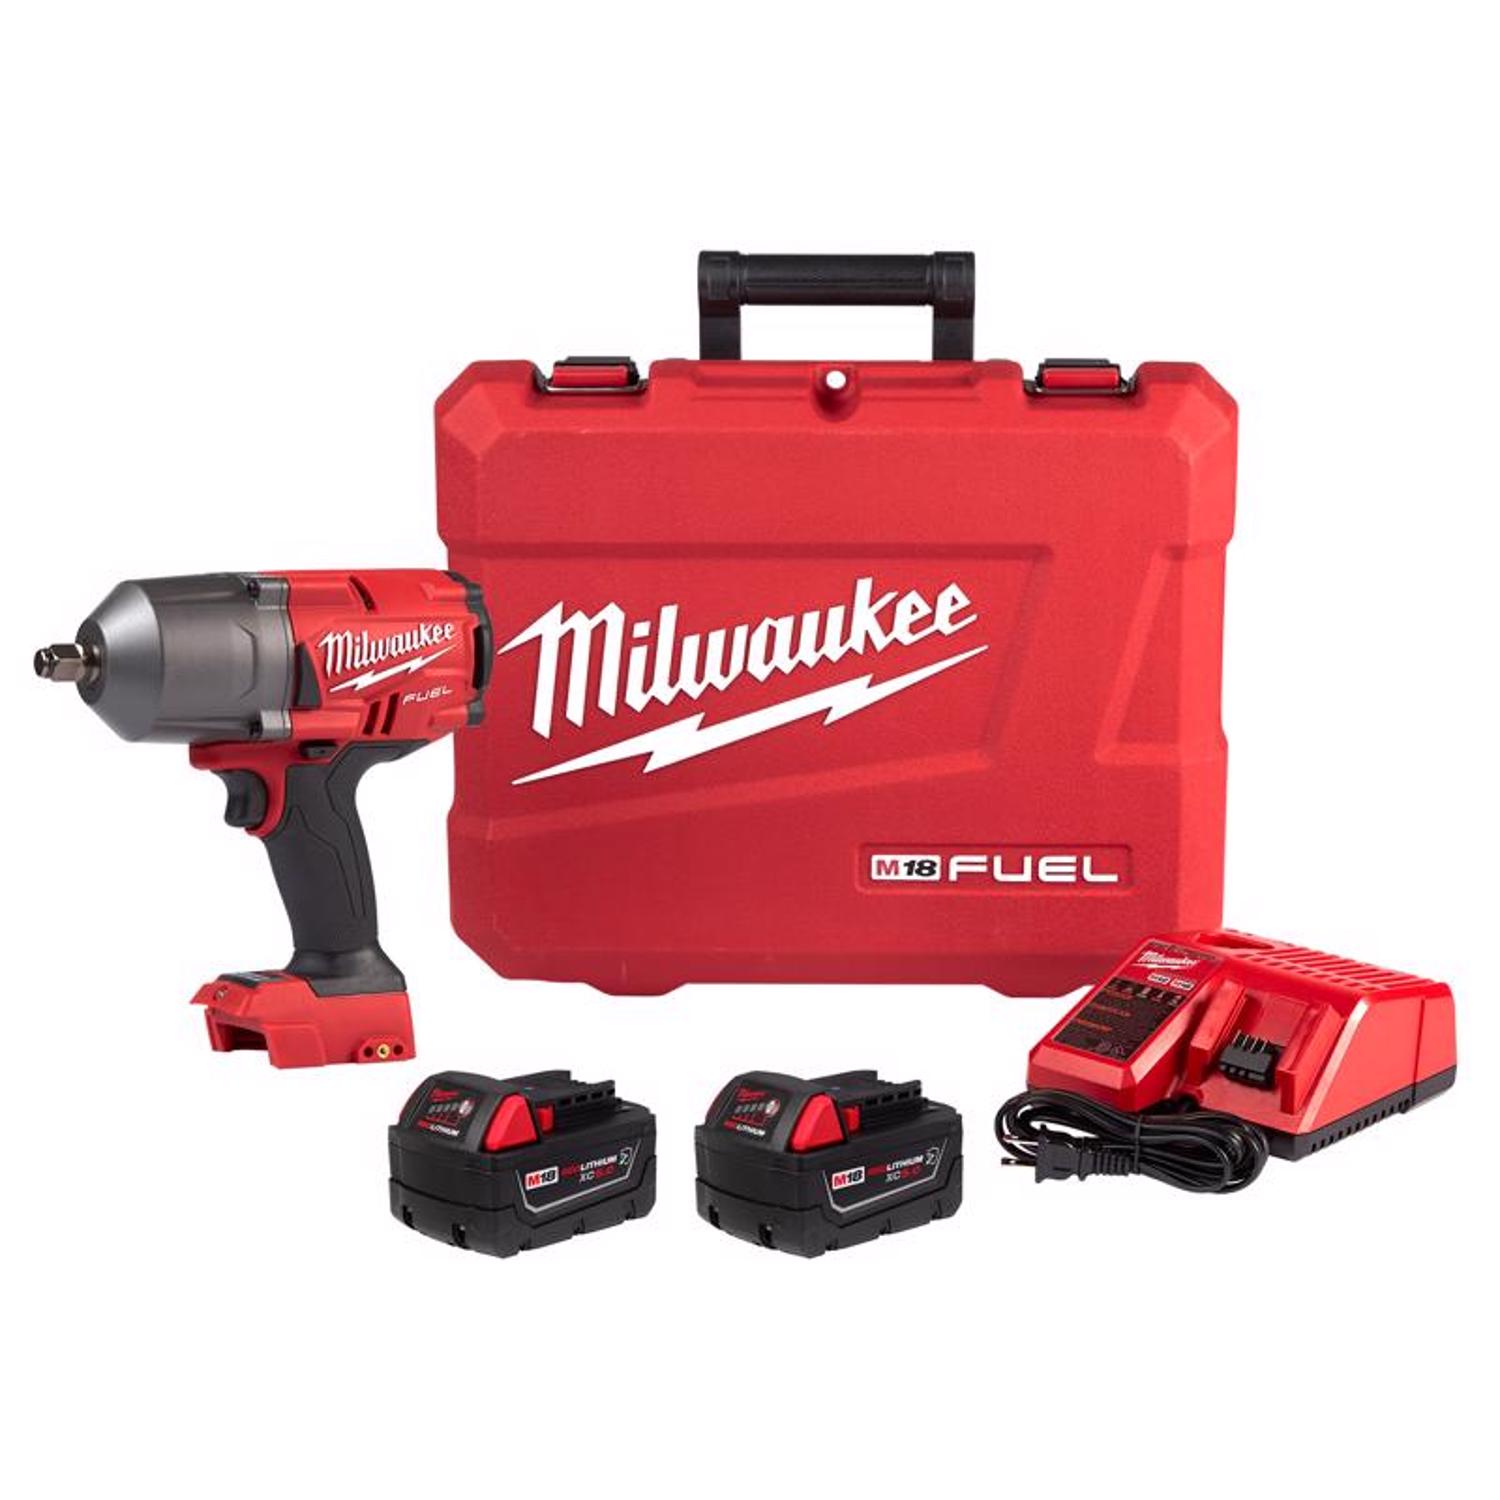 Photos - Drill / Screwdriver Milwaukee M18 FUEL 1/2 in. Cordless Brushless High Torque Impact Wrench Ki 